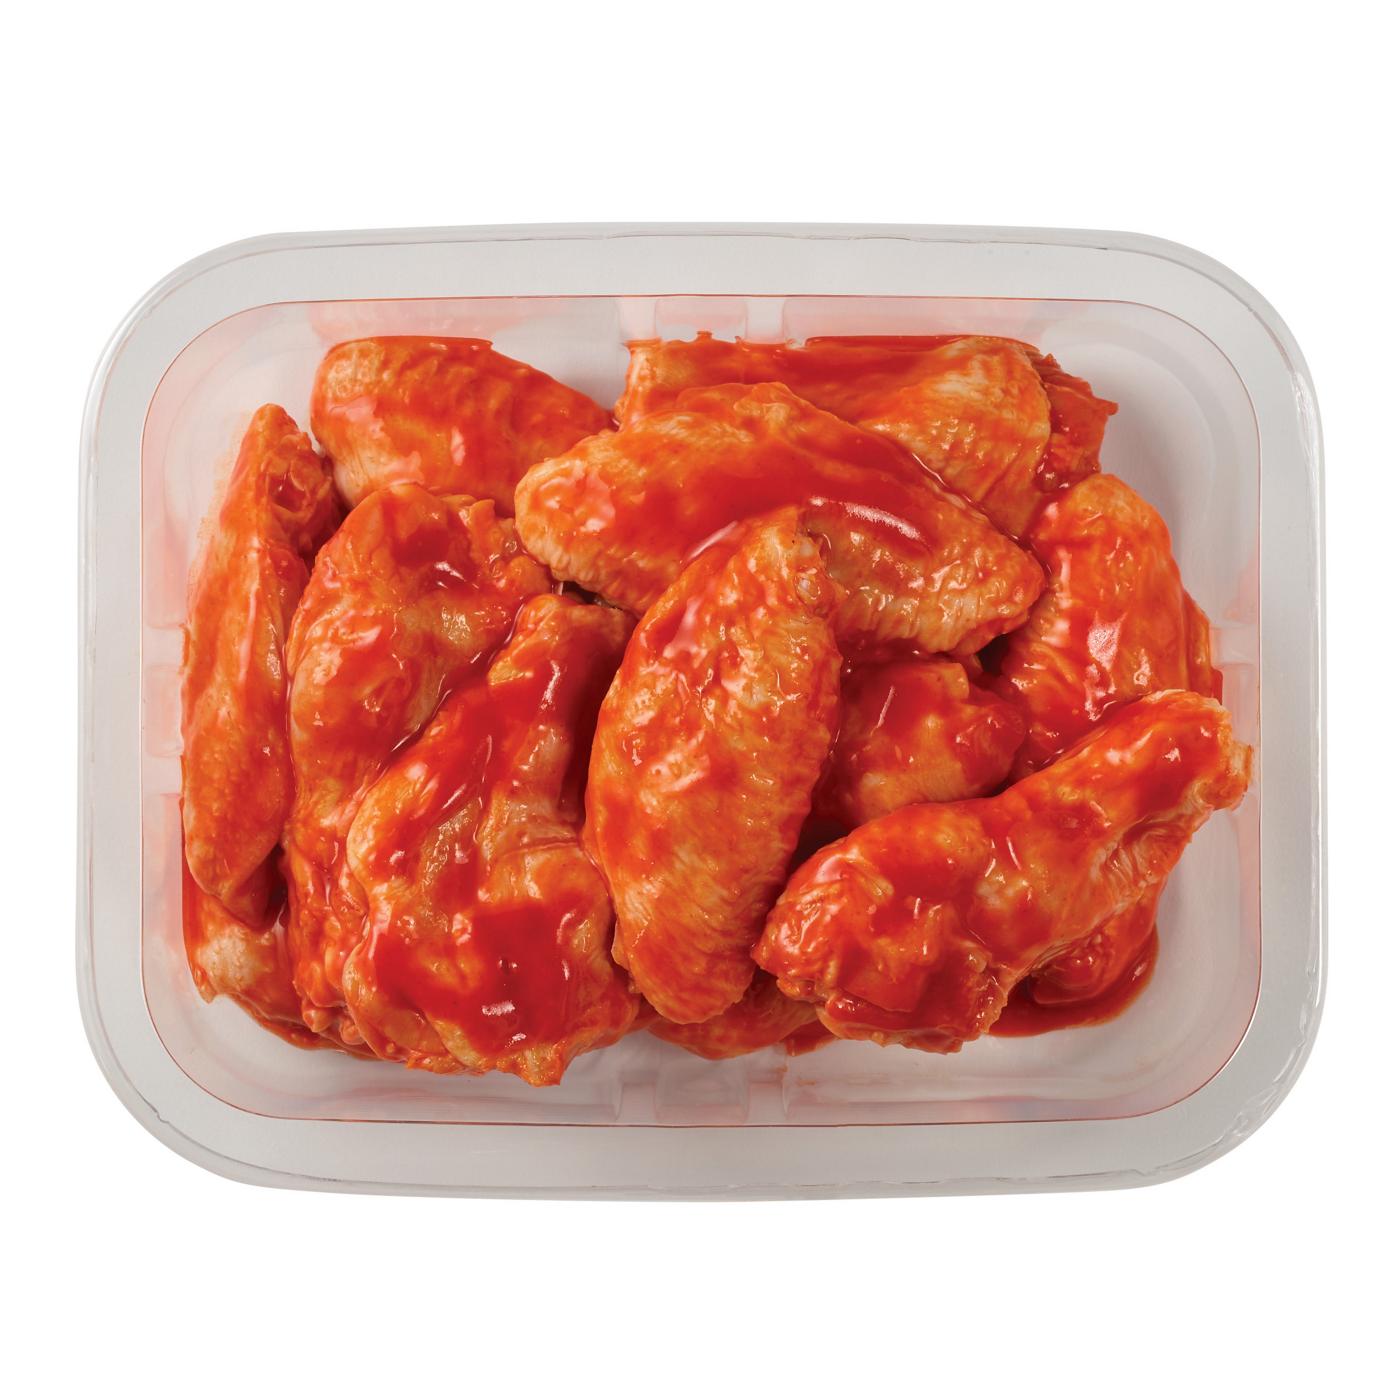 H-E-B Meat Market Marinated Chicken Hot Wings; image 1 of 3